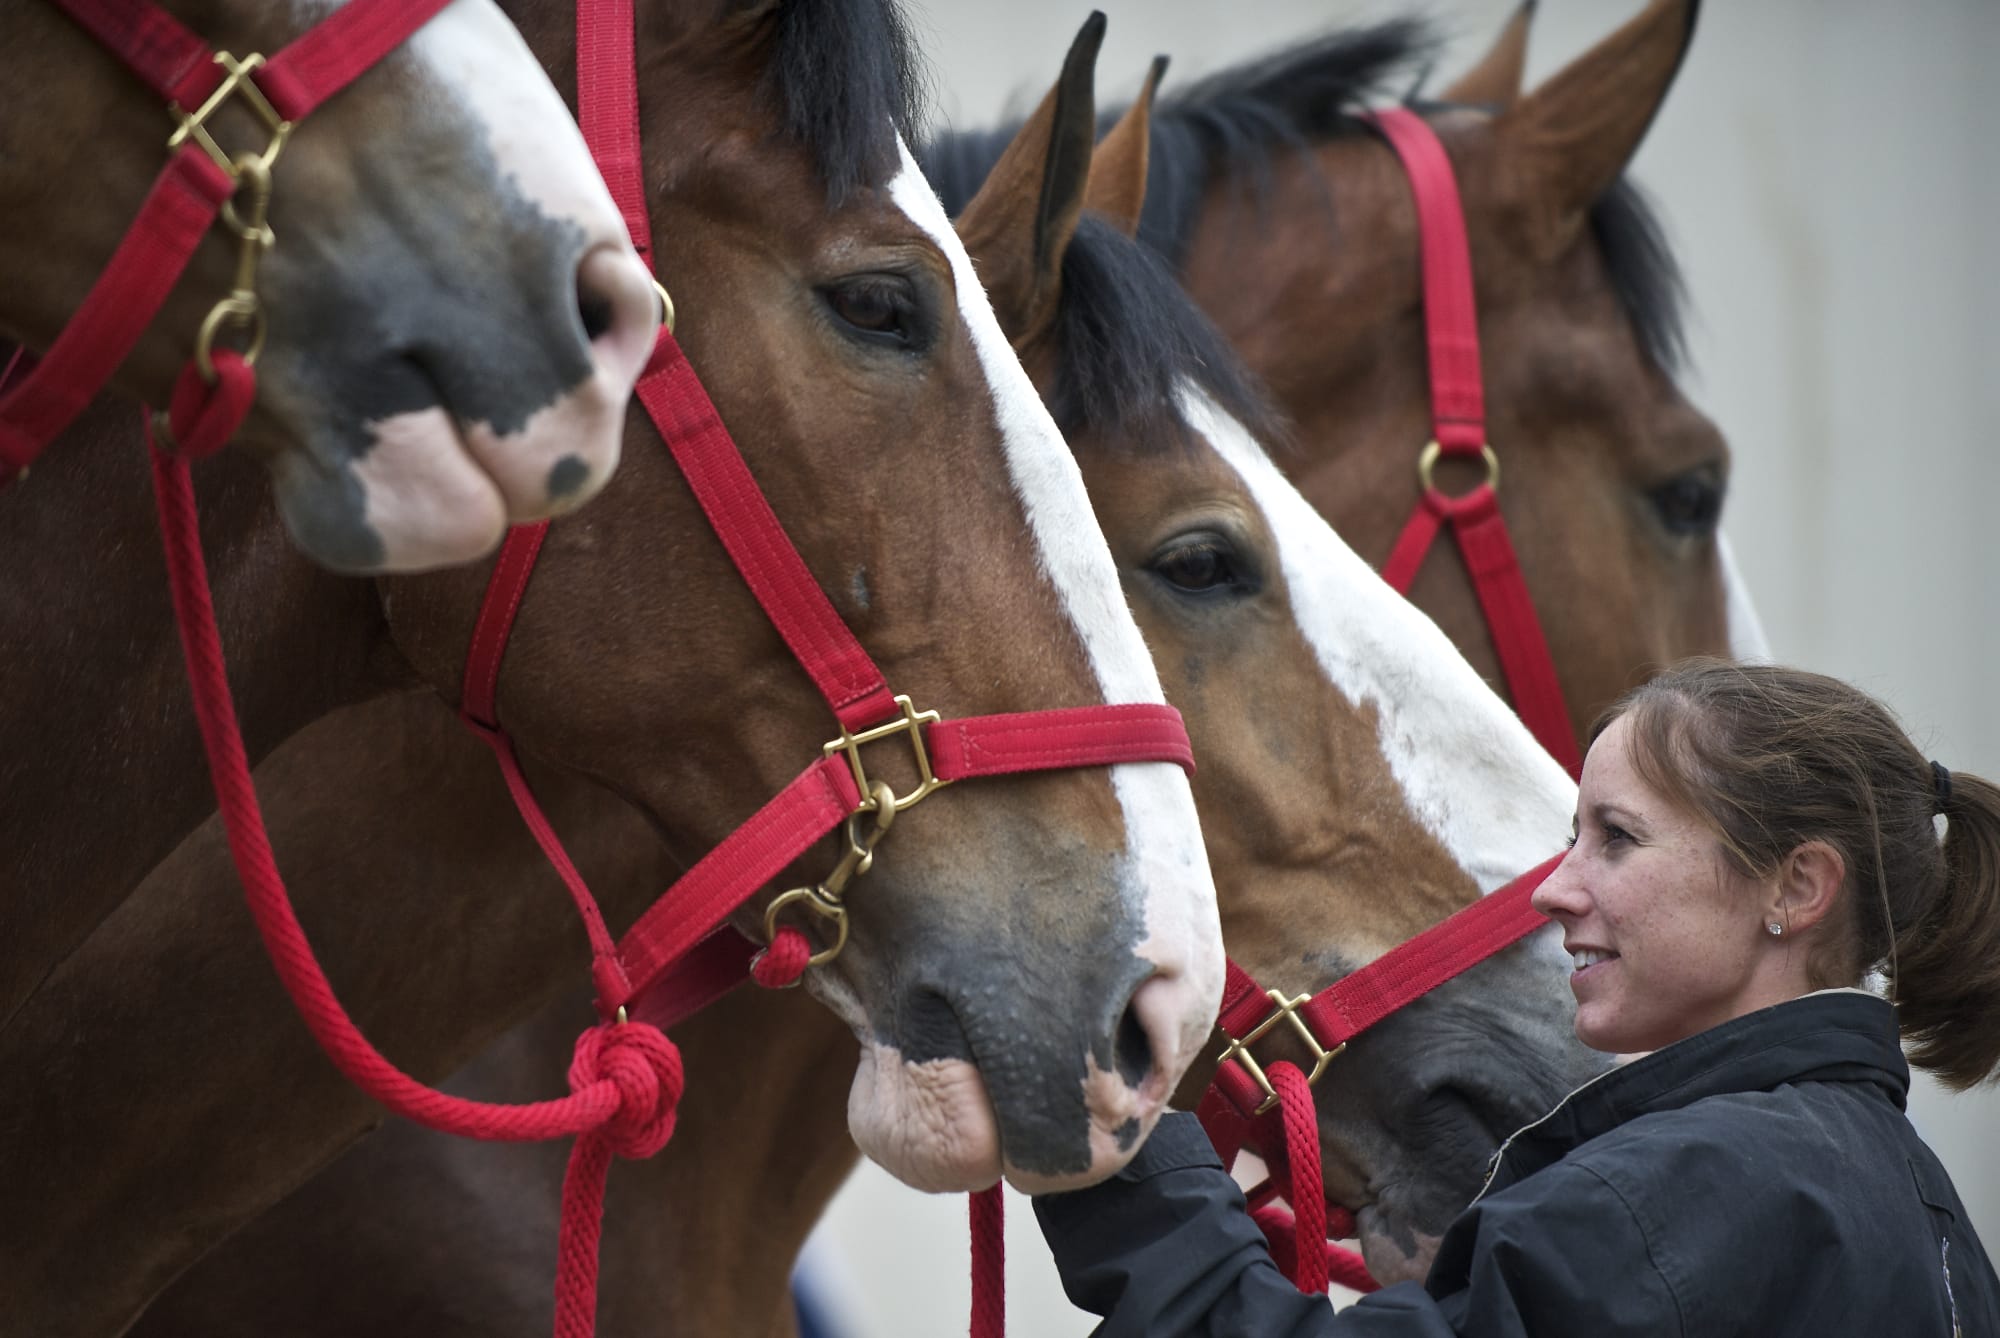 Trainer Dana Cook helps tend a Clydesdale draft horse, part of the famous Budweiser team.